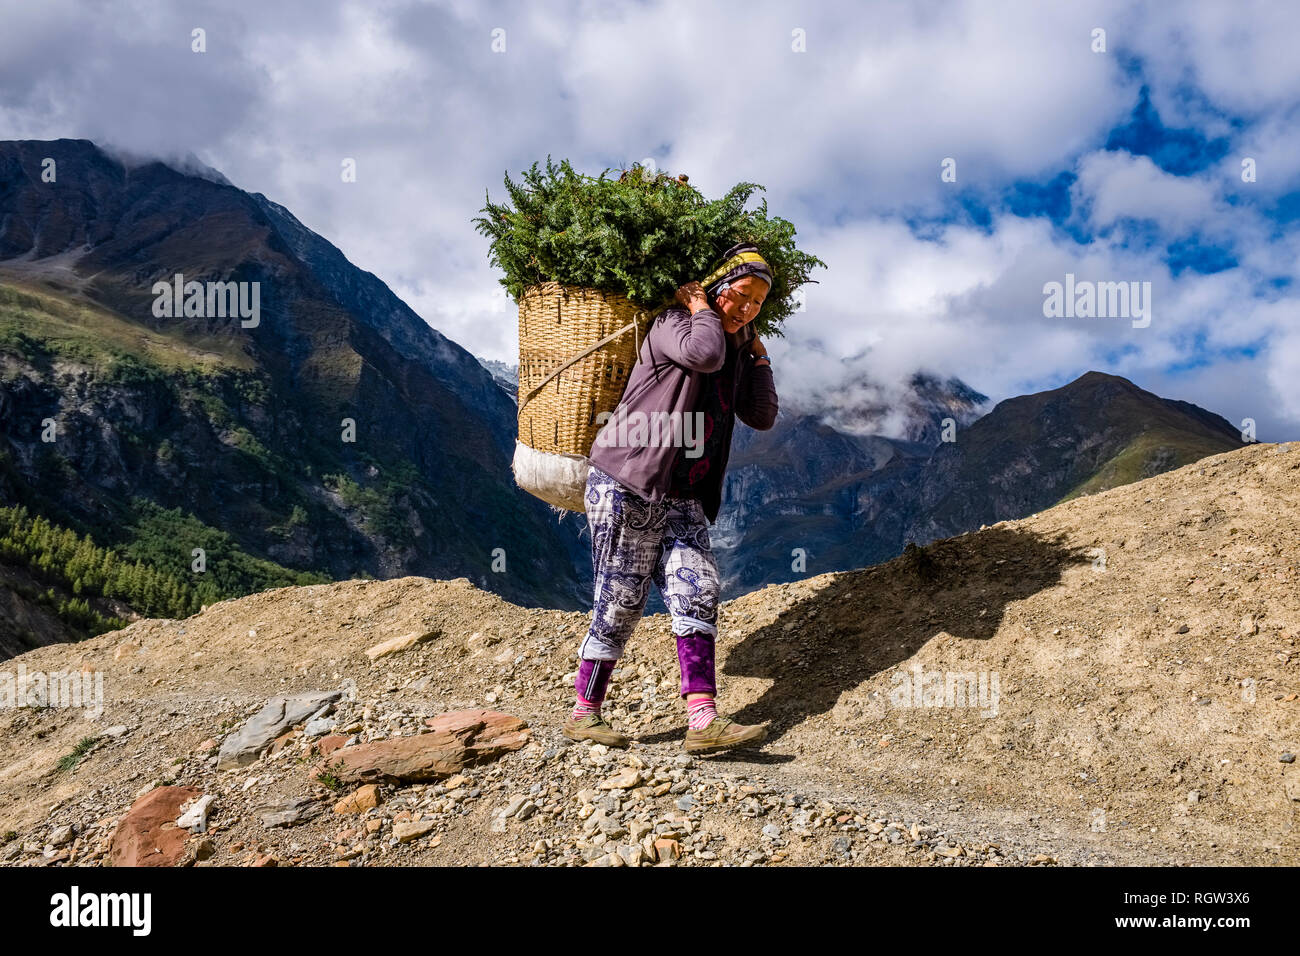 A local woman is carrying greenery in a basket in the Upper Marsyangdi valley, cloudy alpine landscape of the Annapurna group in the distance Stock Photo